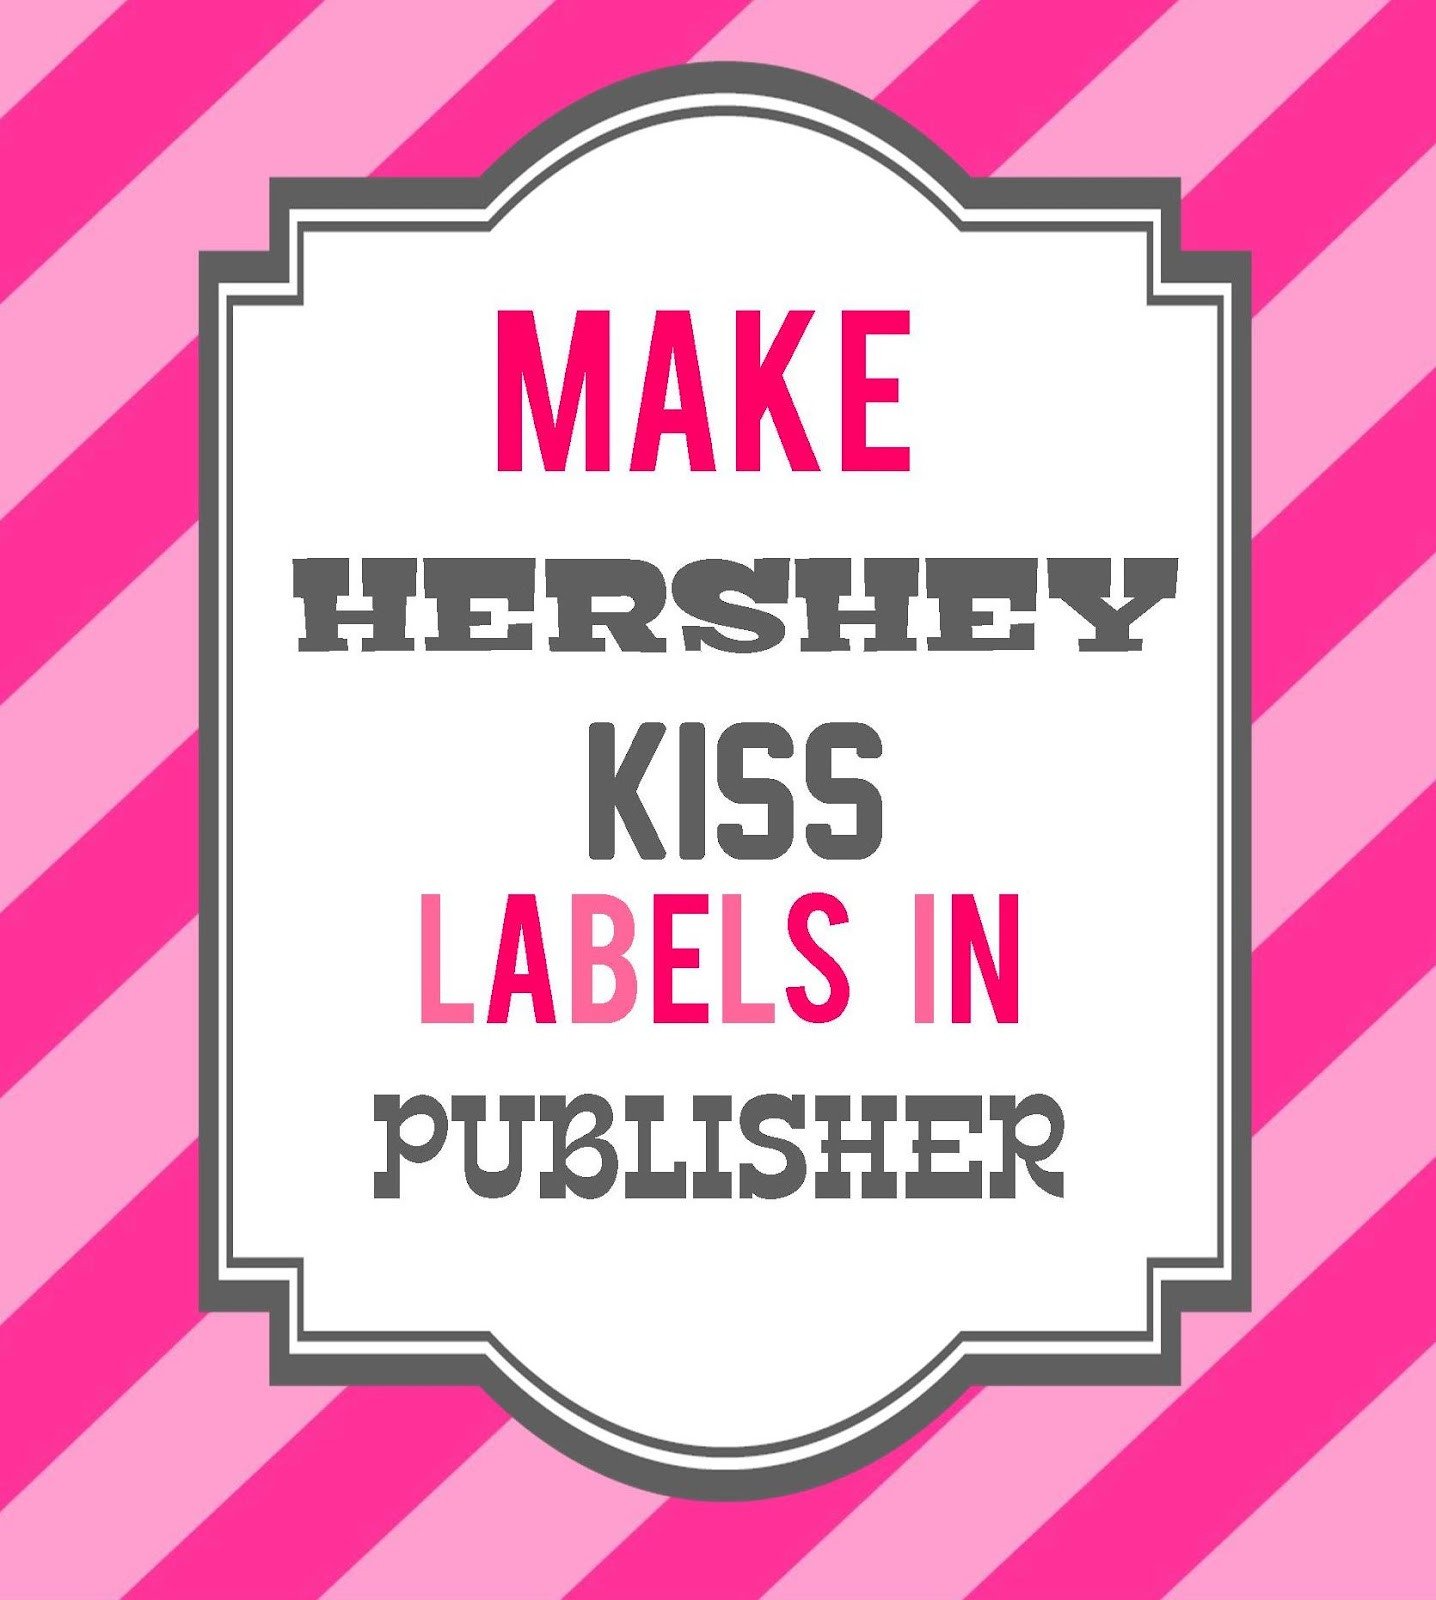 How To Make Hershey Kiss Labels in Publisher